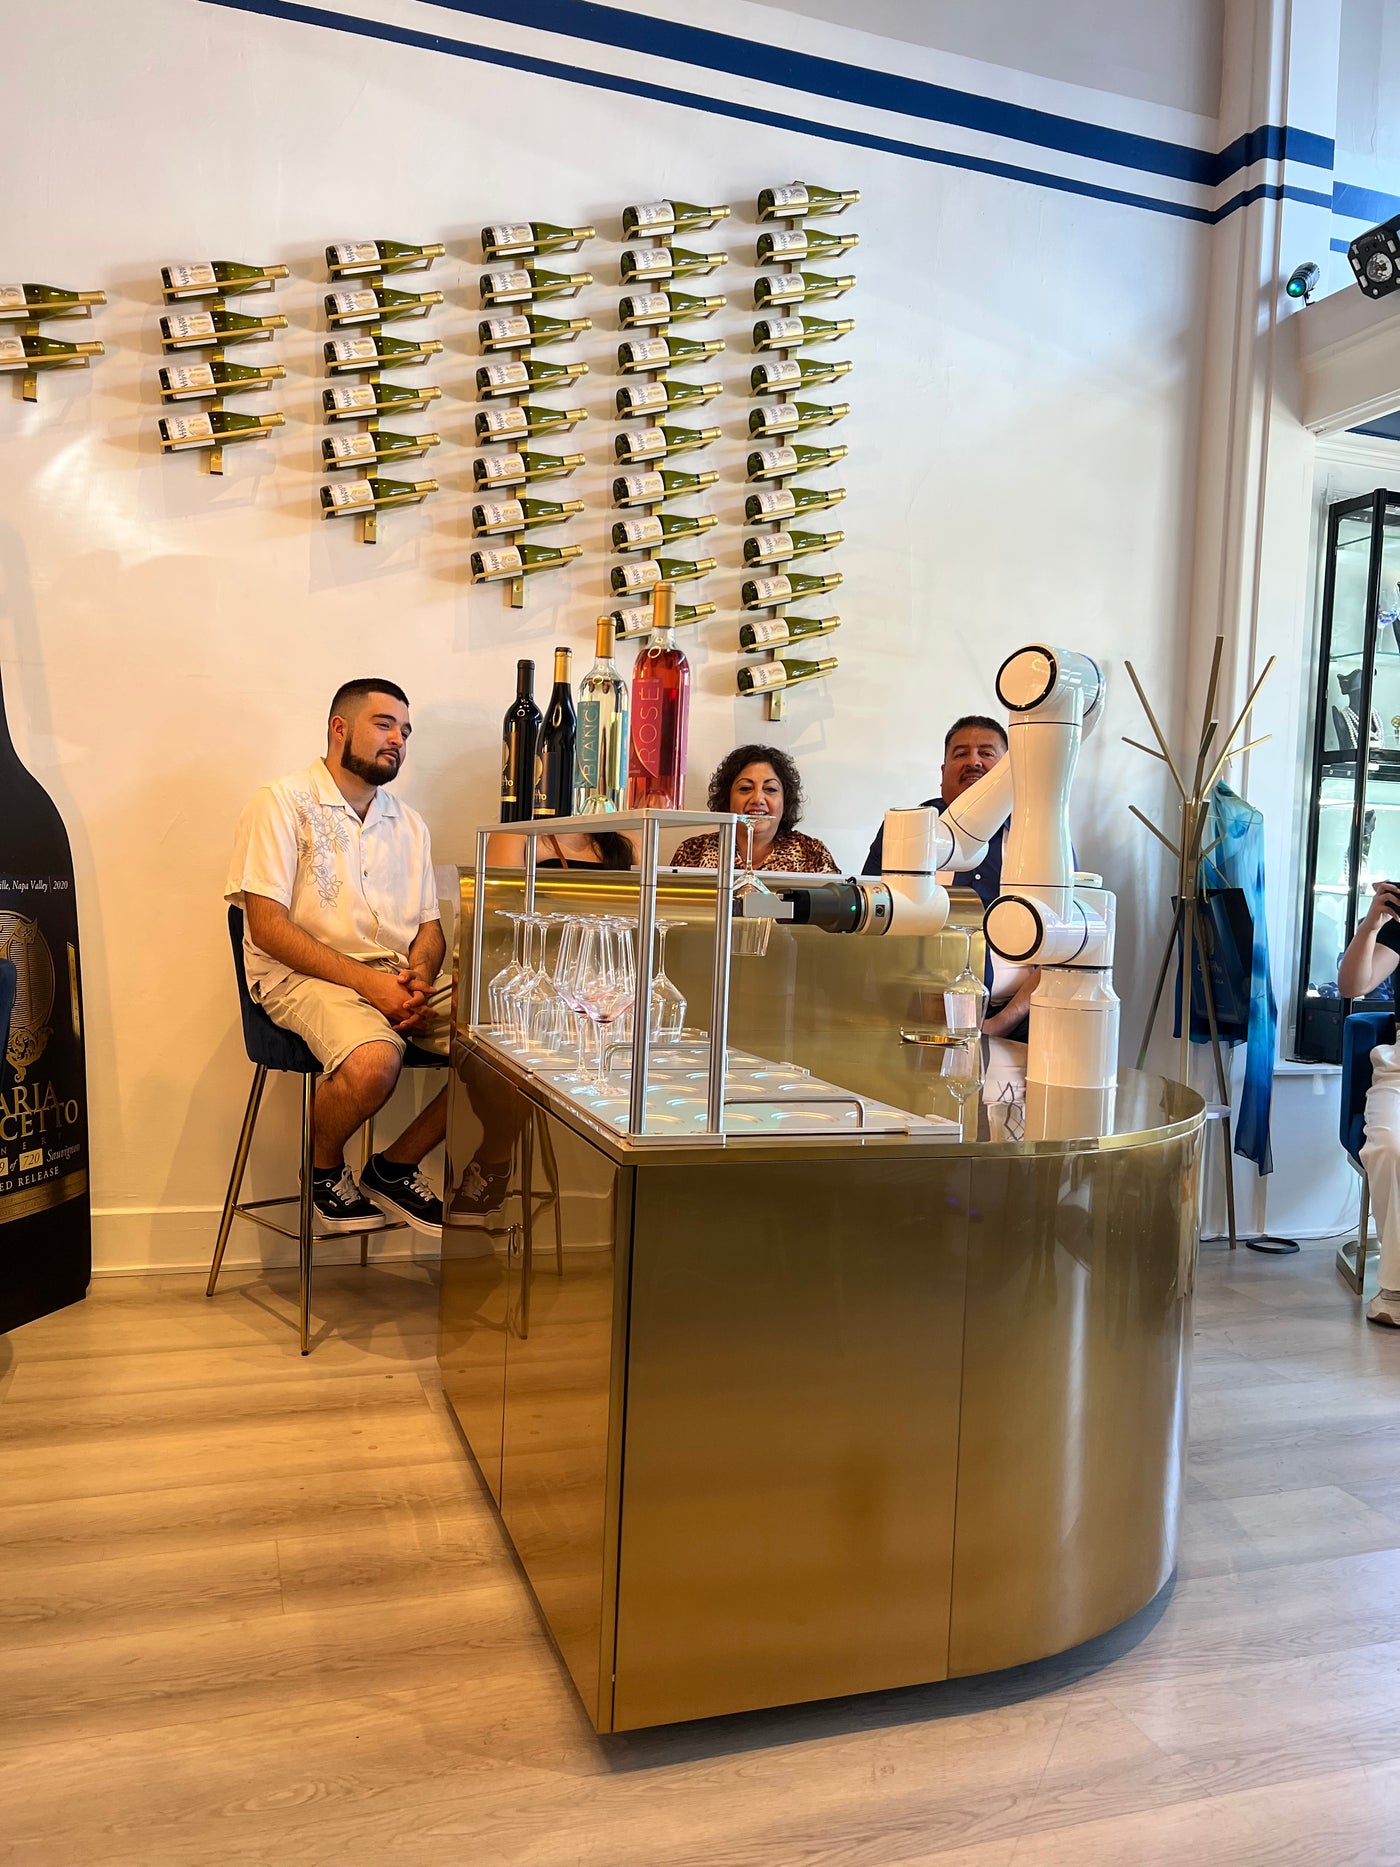 Wine tasting with Robot sommelier - 4 wines: $75